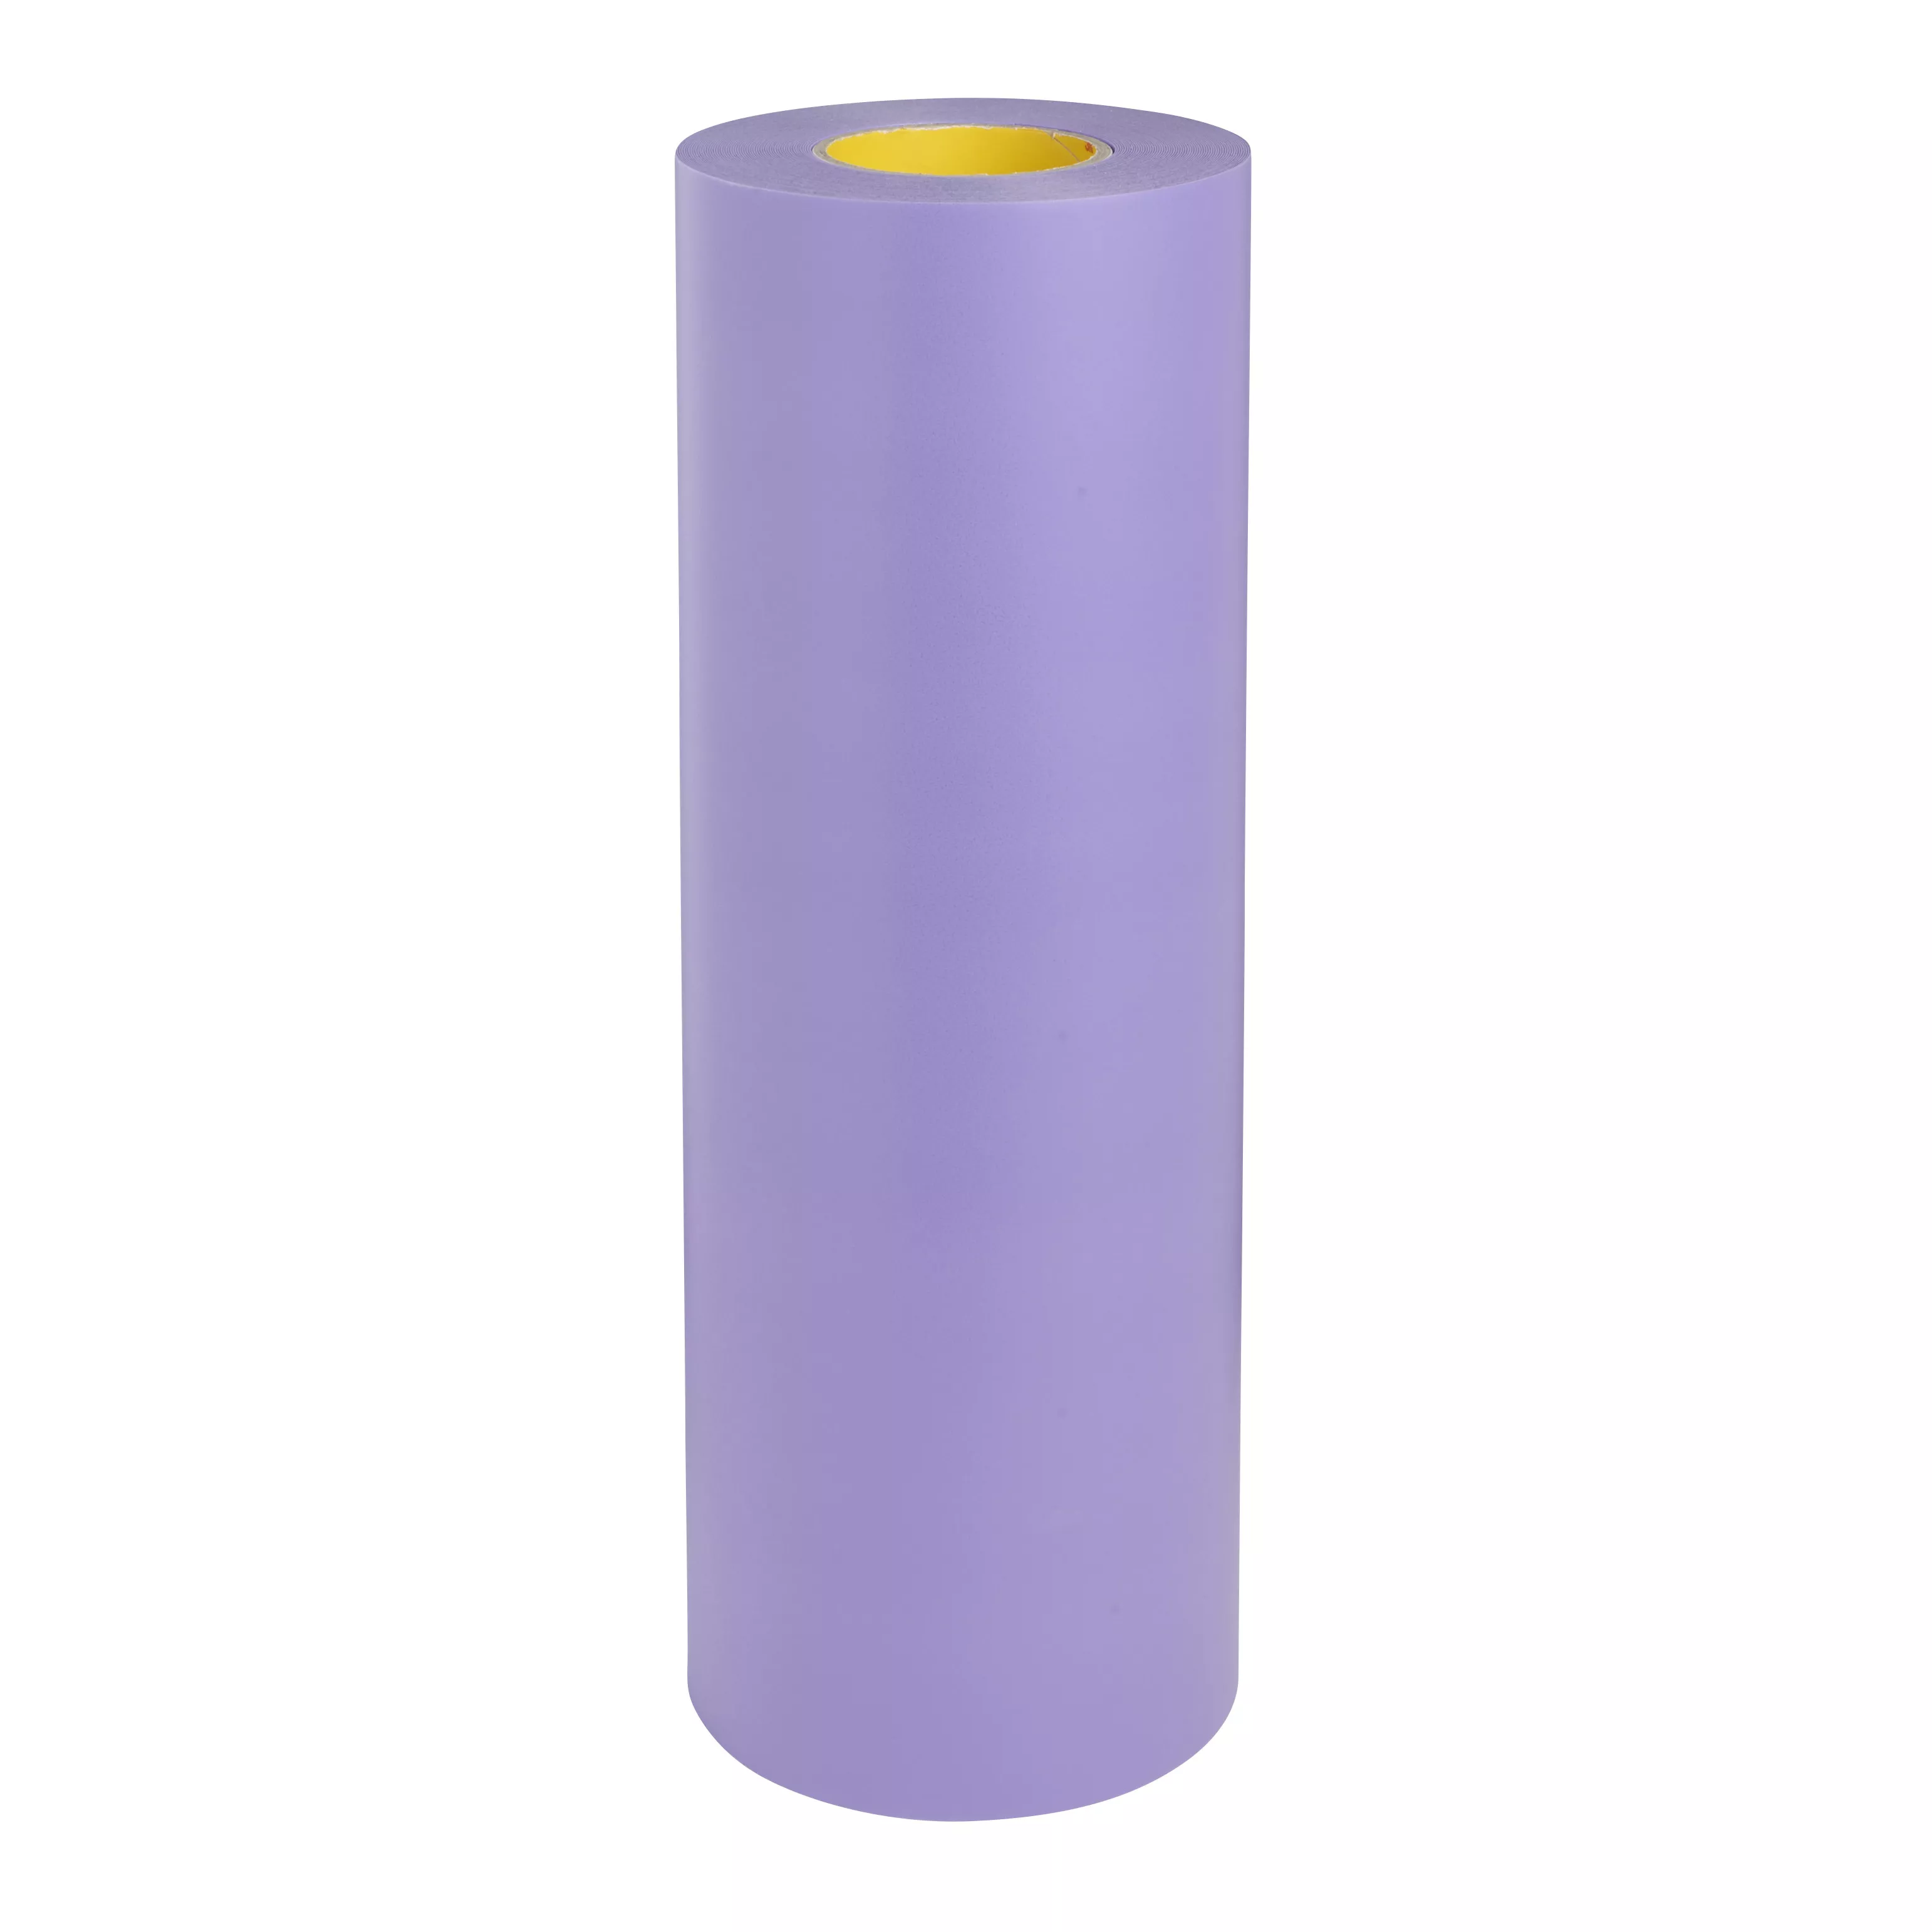 3M™ Cushion-Mount™ Plus Plate Mounting Tape B1520, Purple, 18 in x 36yd,
20 mil, 1 Roll/case